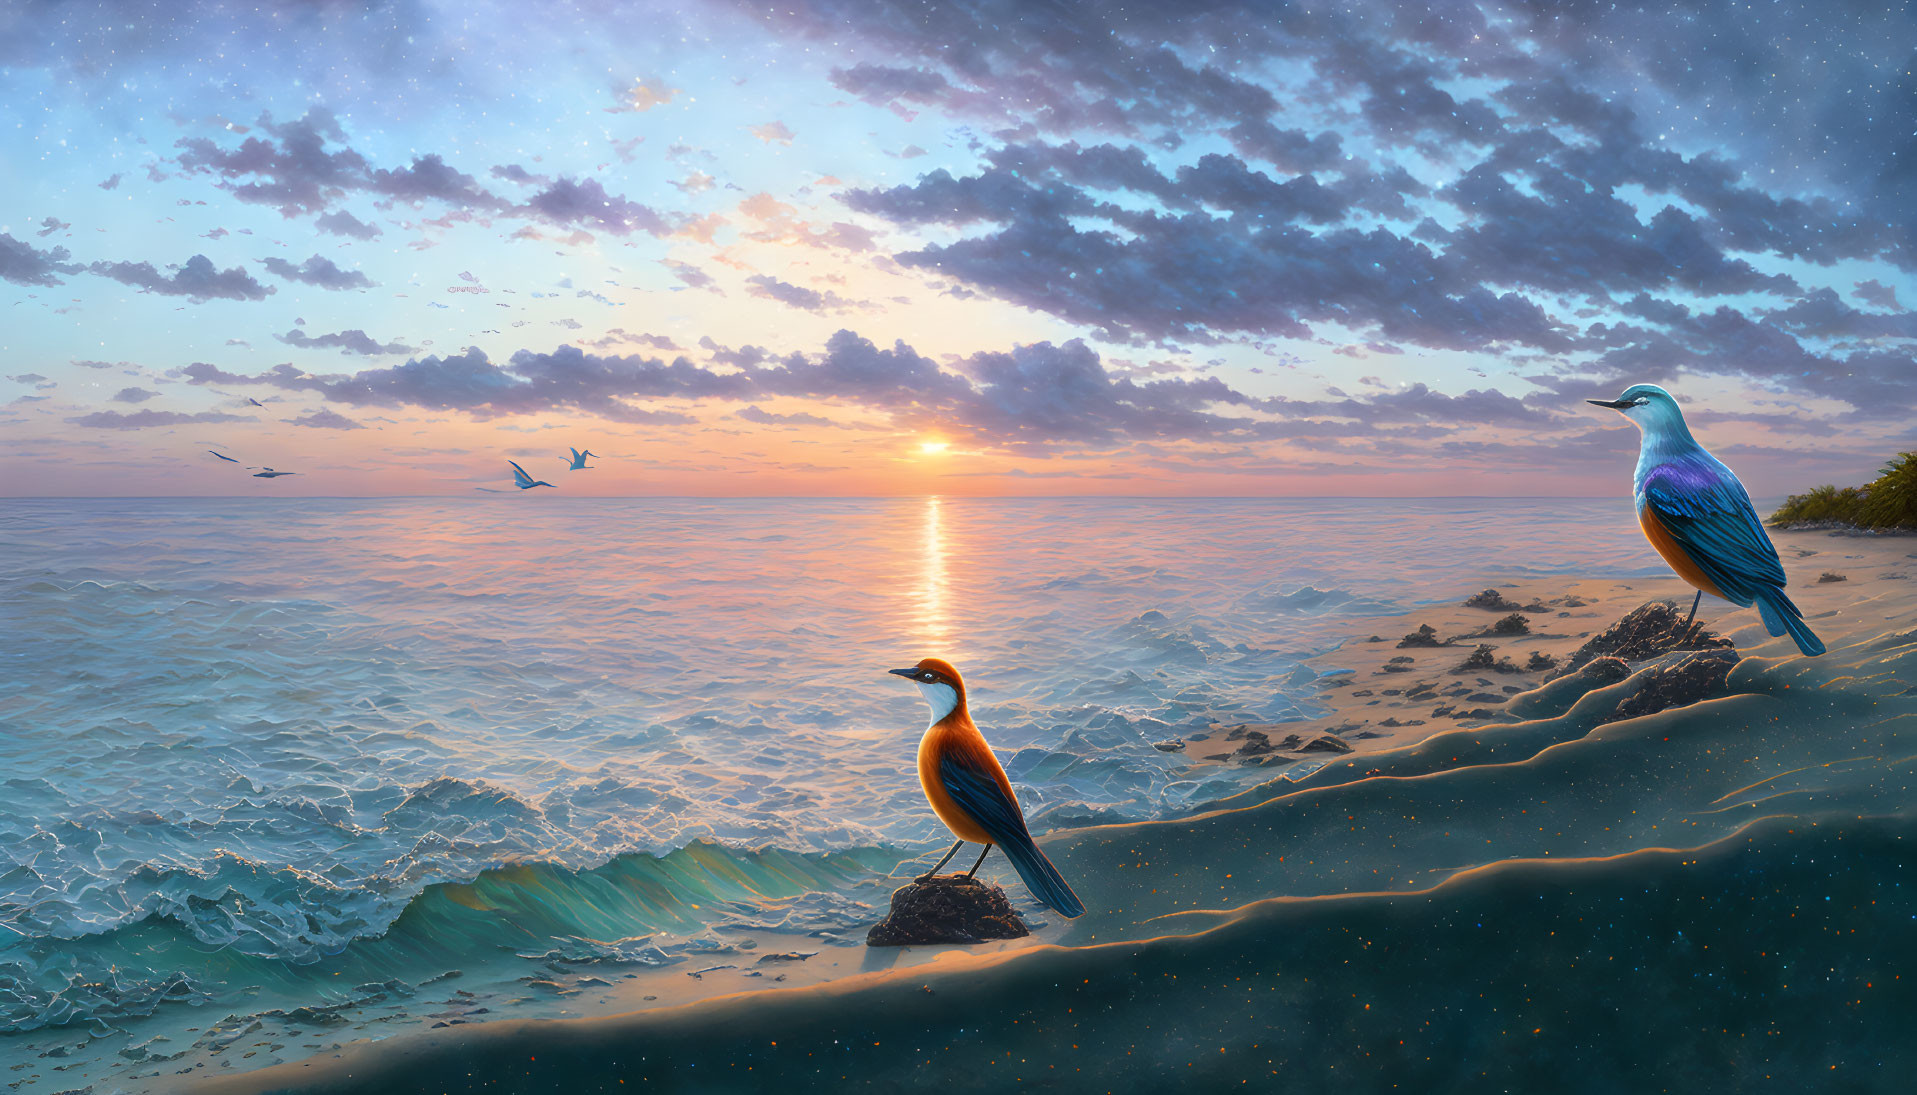 Vibrant sunset beach scene with stars, flying birds, and colorful stylized birds